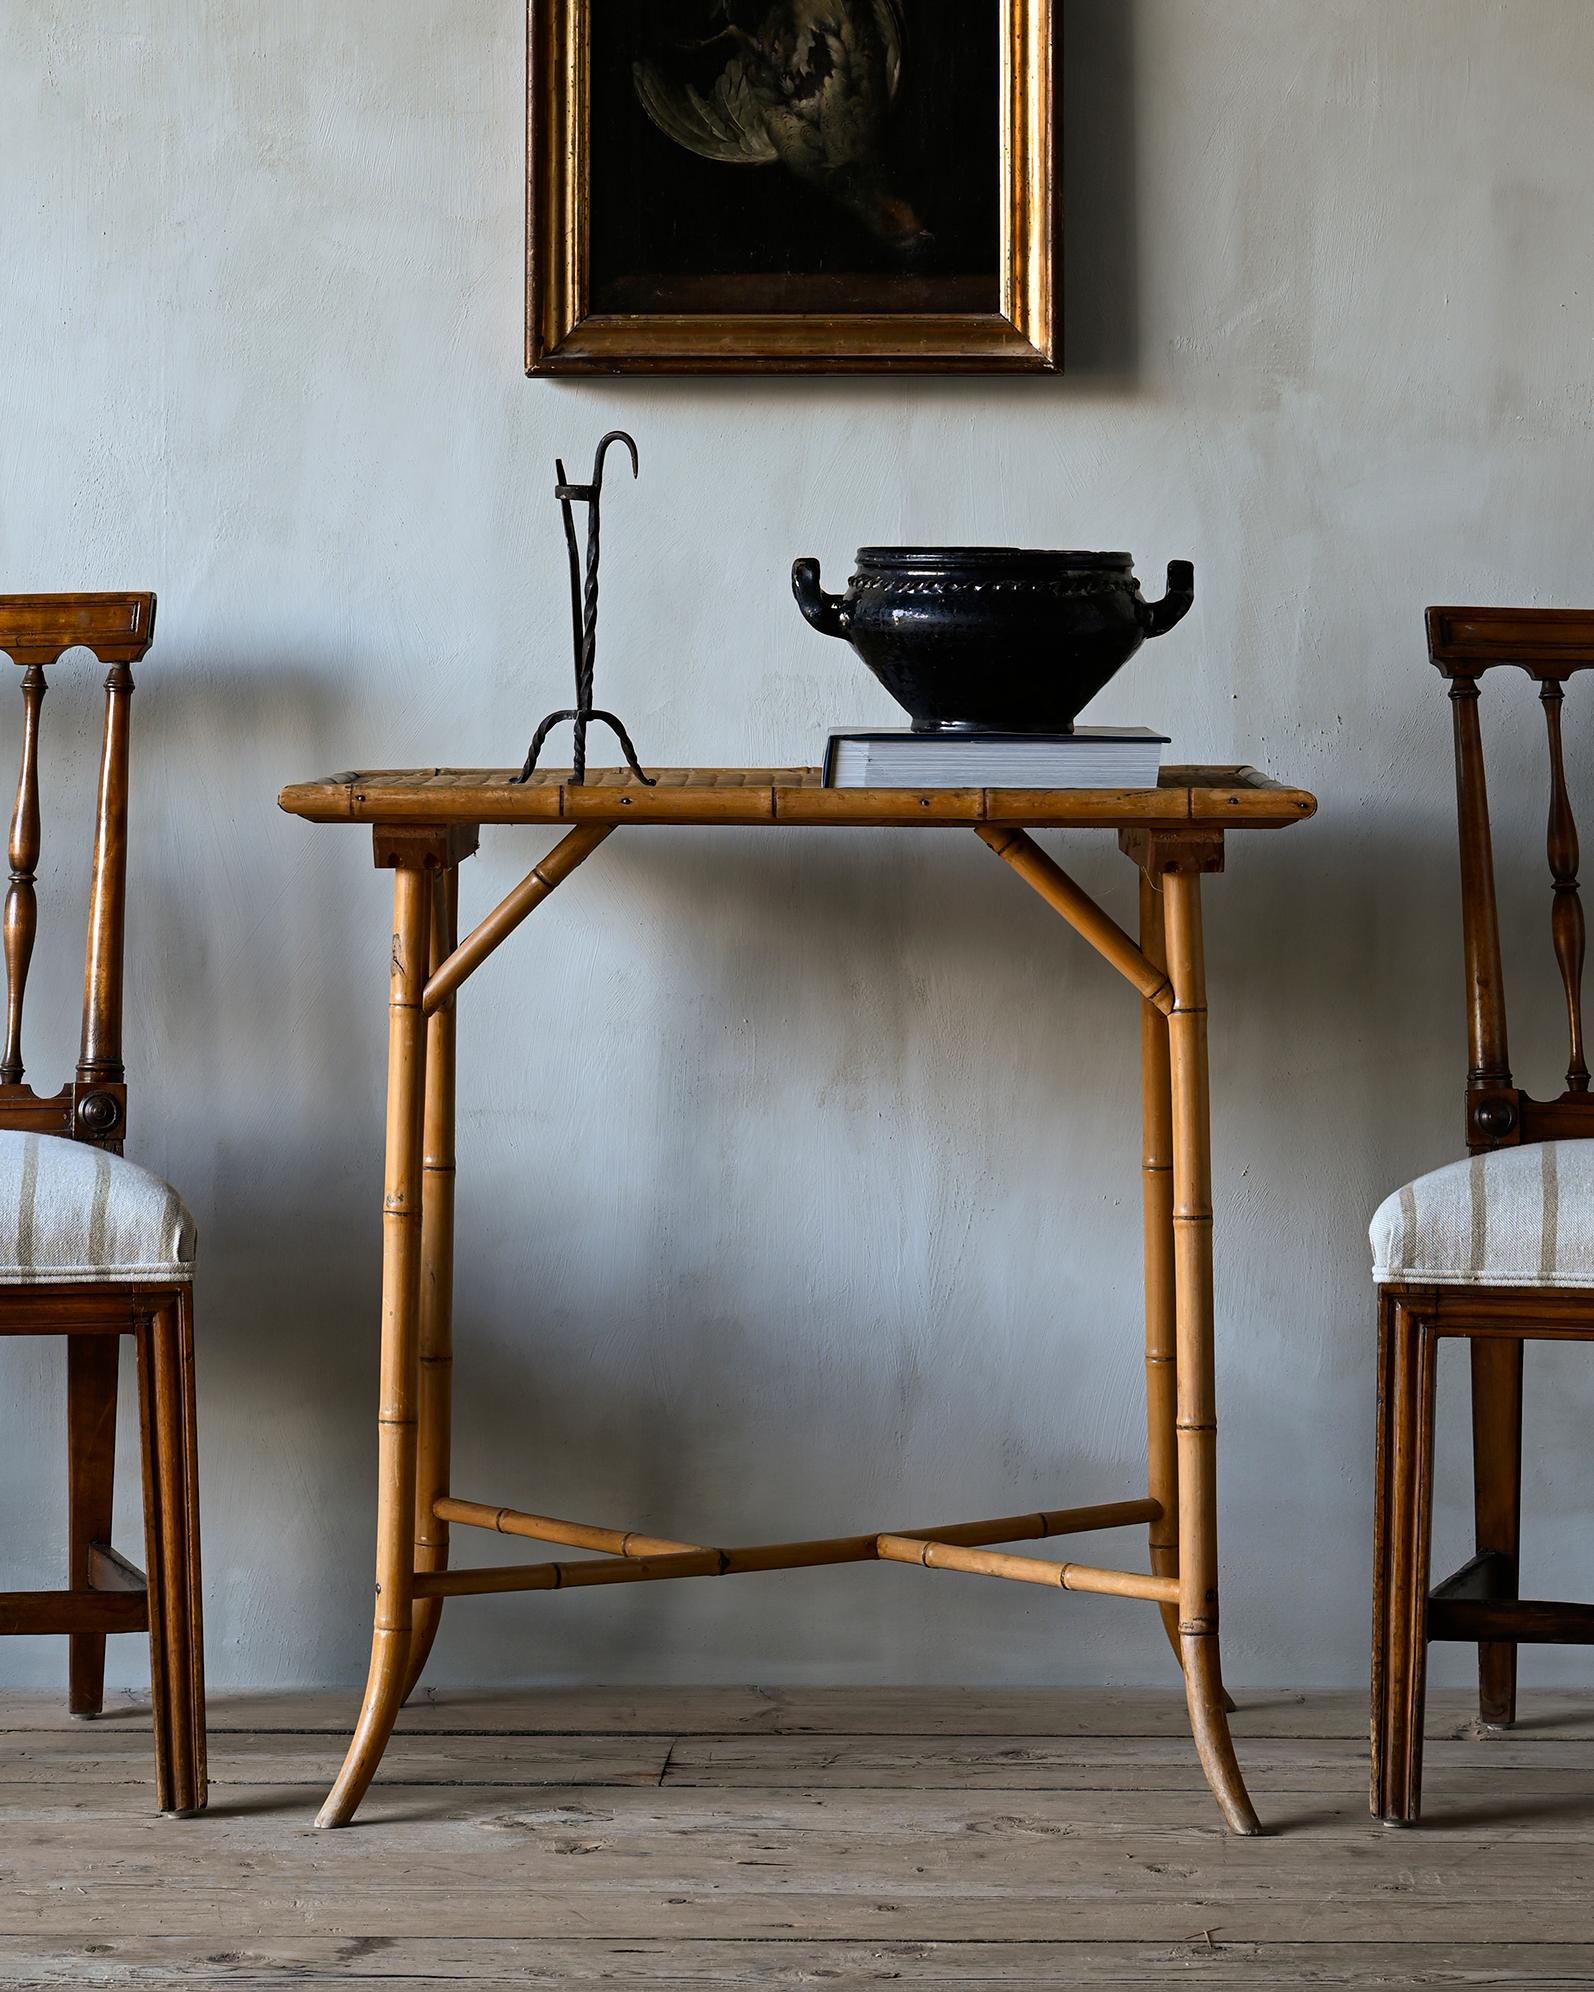 Unusual 19th century Swedish faux bamboo table in an good shape and with a braided thin reed top. Ca 1890 - 1900, Sweden.